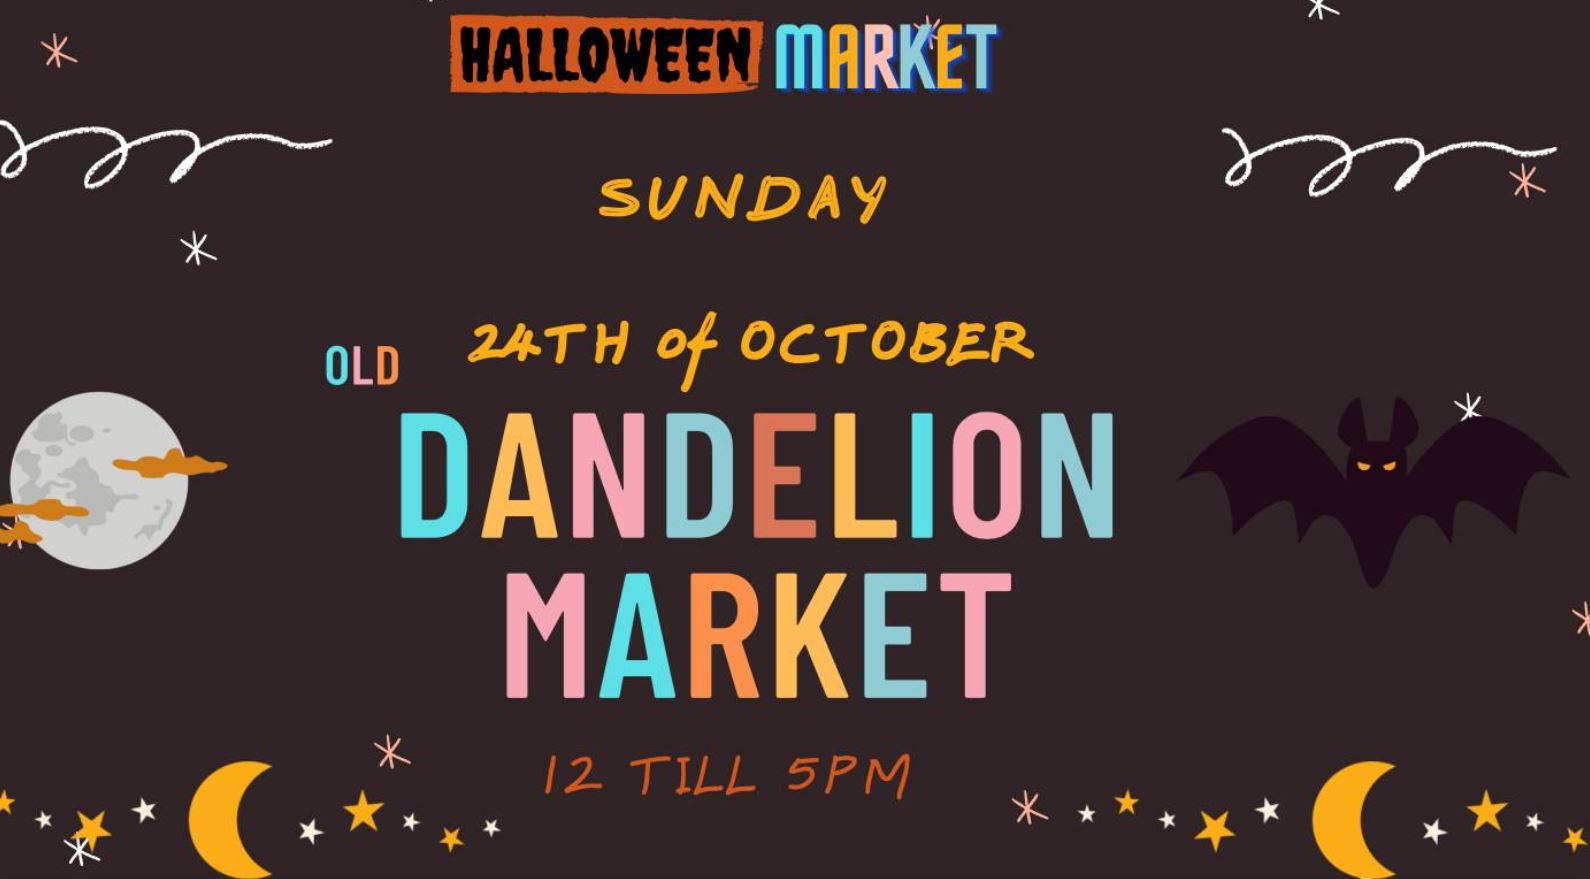 There is a lot happening in Dublin this Halloween!